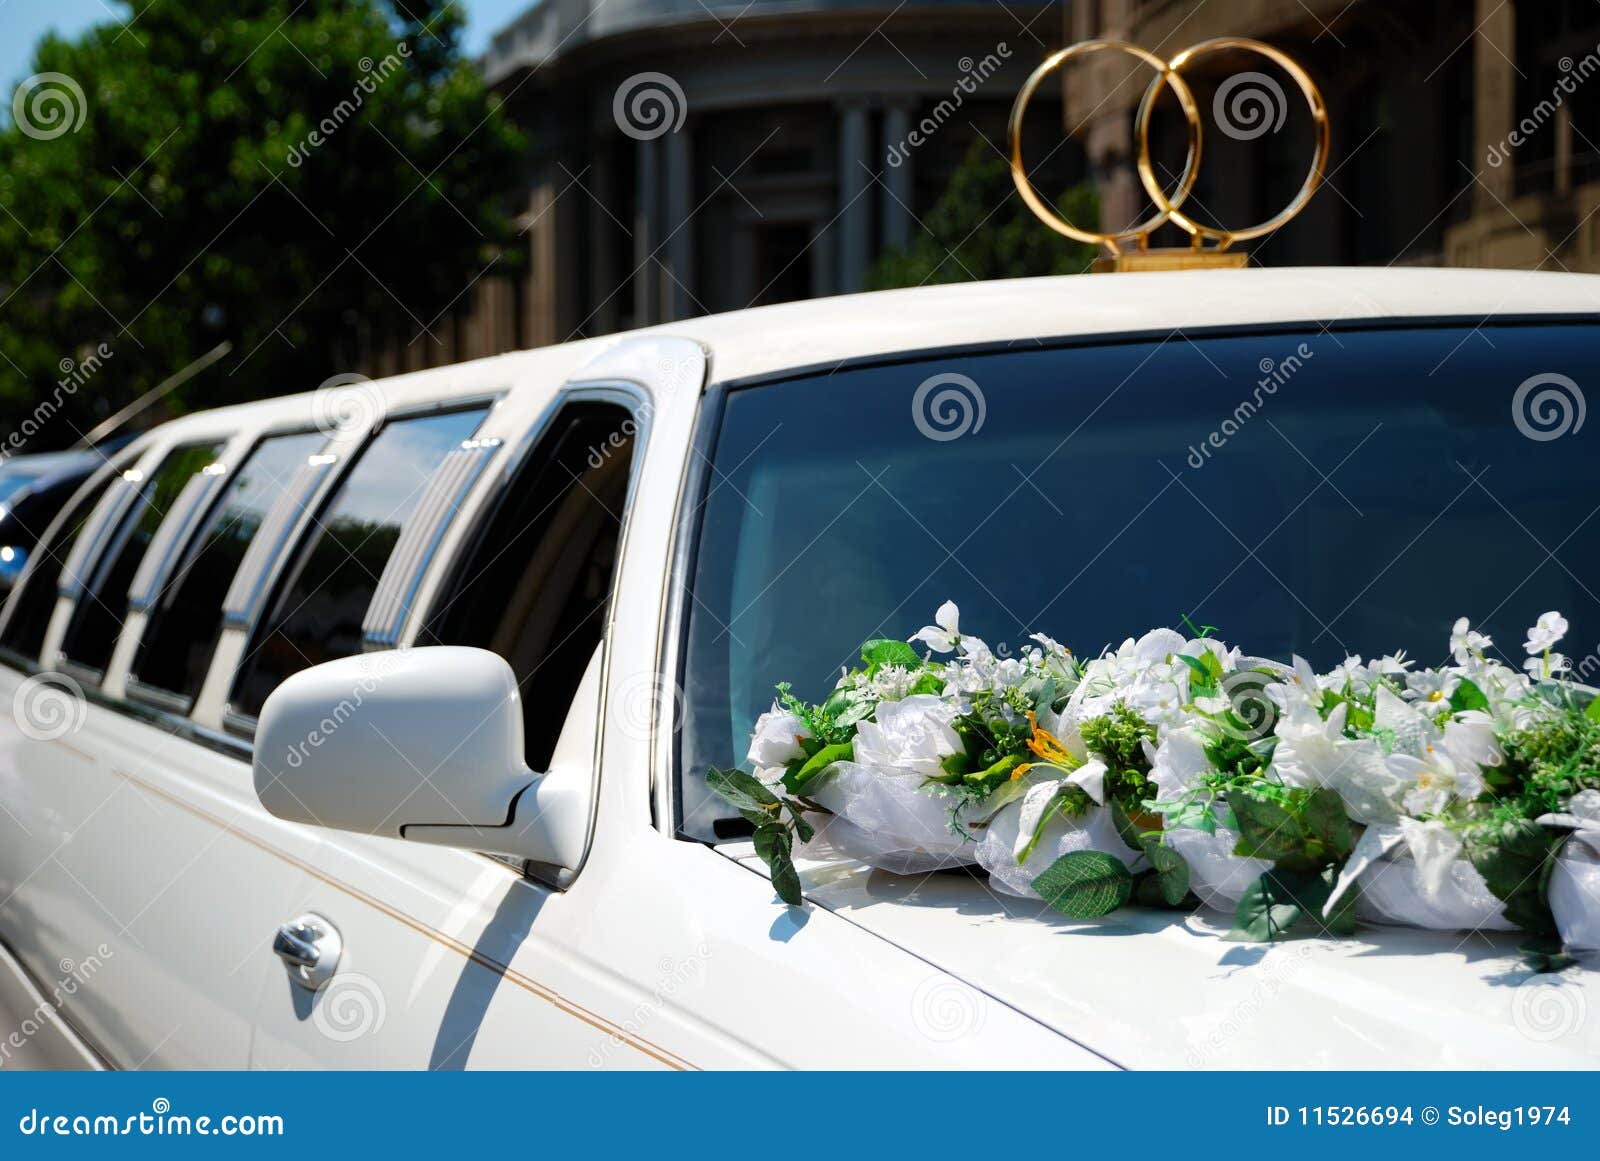 Wedding limousines with flowers